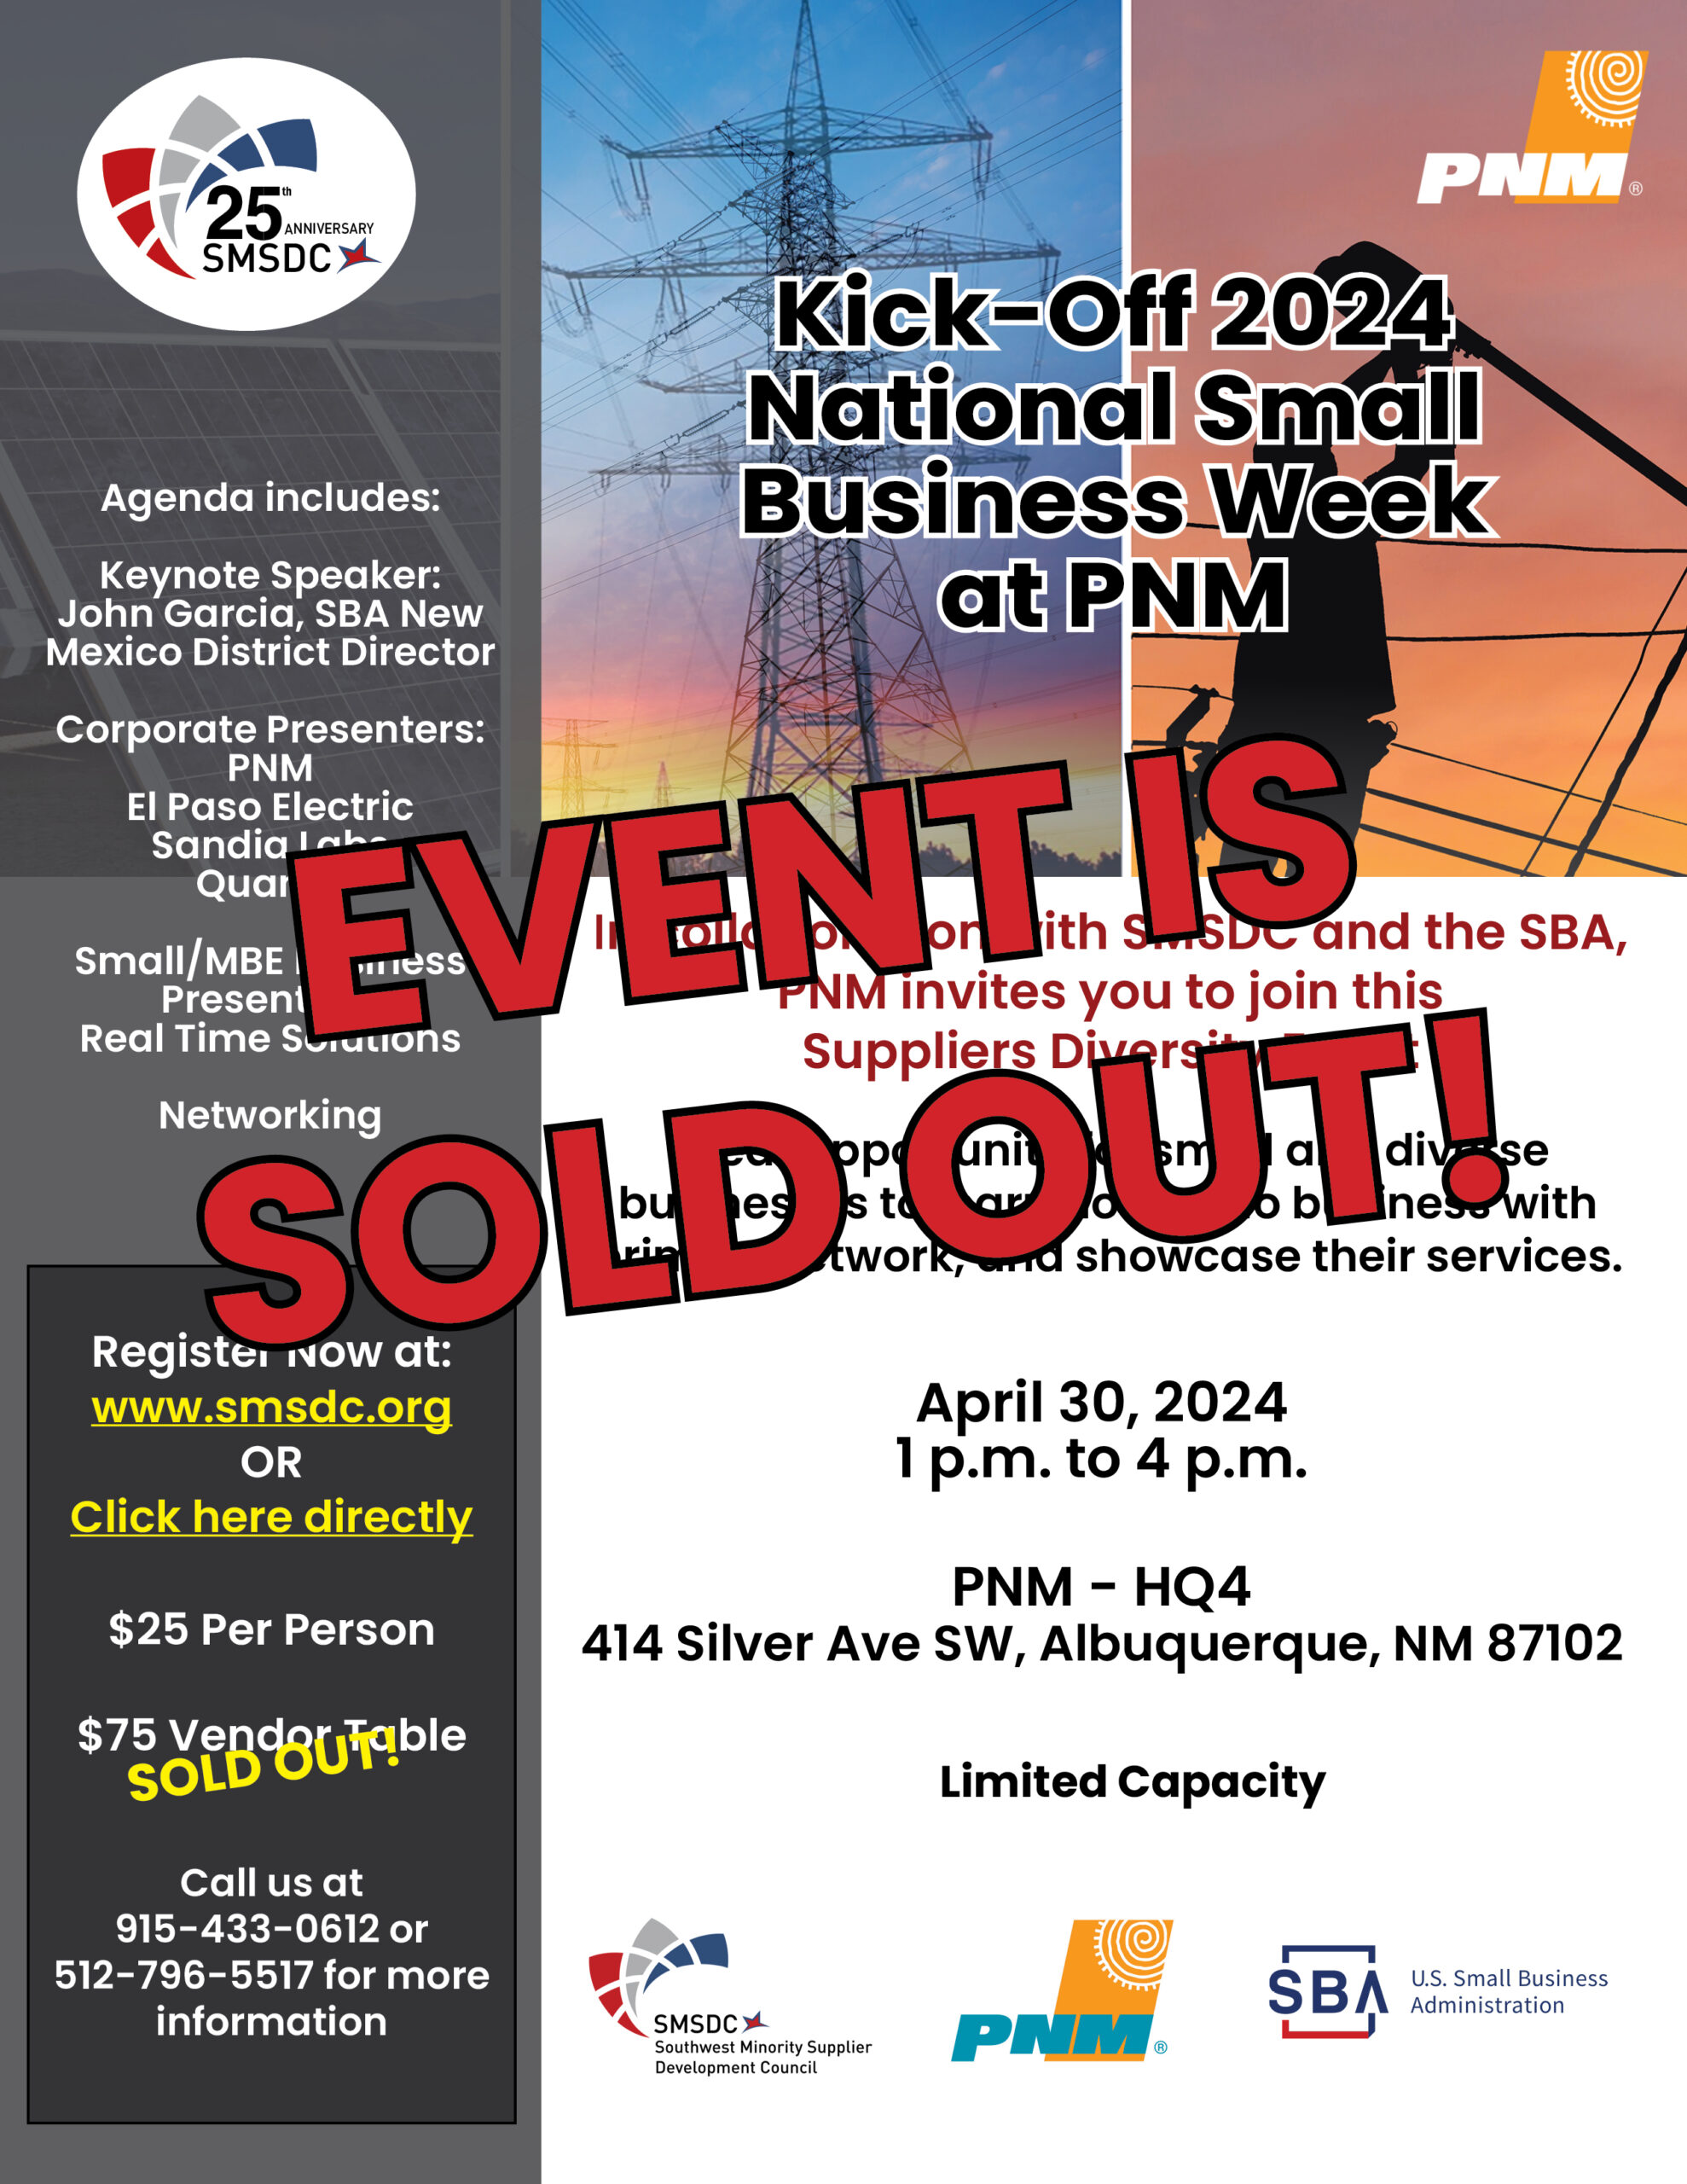 SMSDC's Kick-off Small Business Week @ PNM - EVENT IS SOLD OUT! @ PNM - HQ4